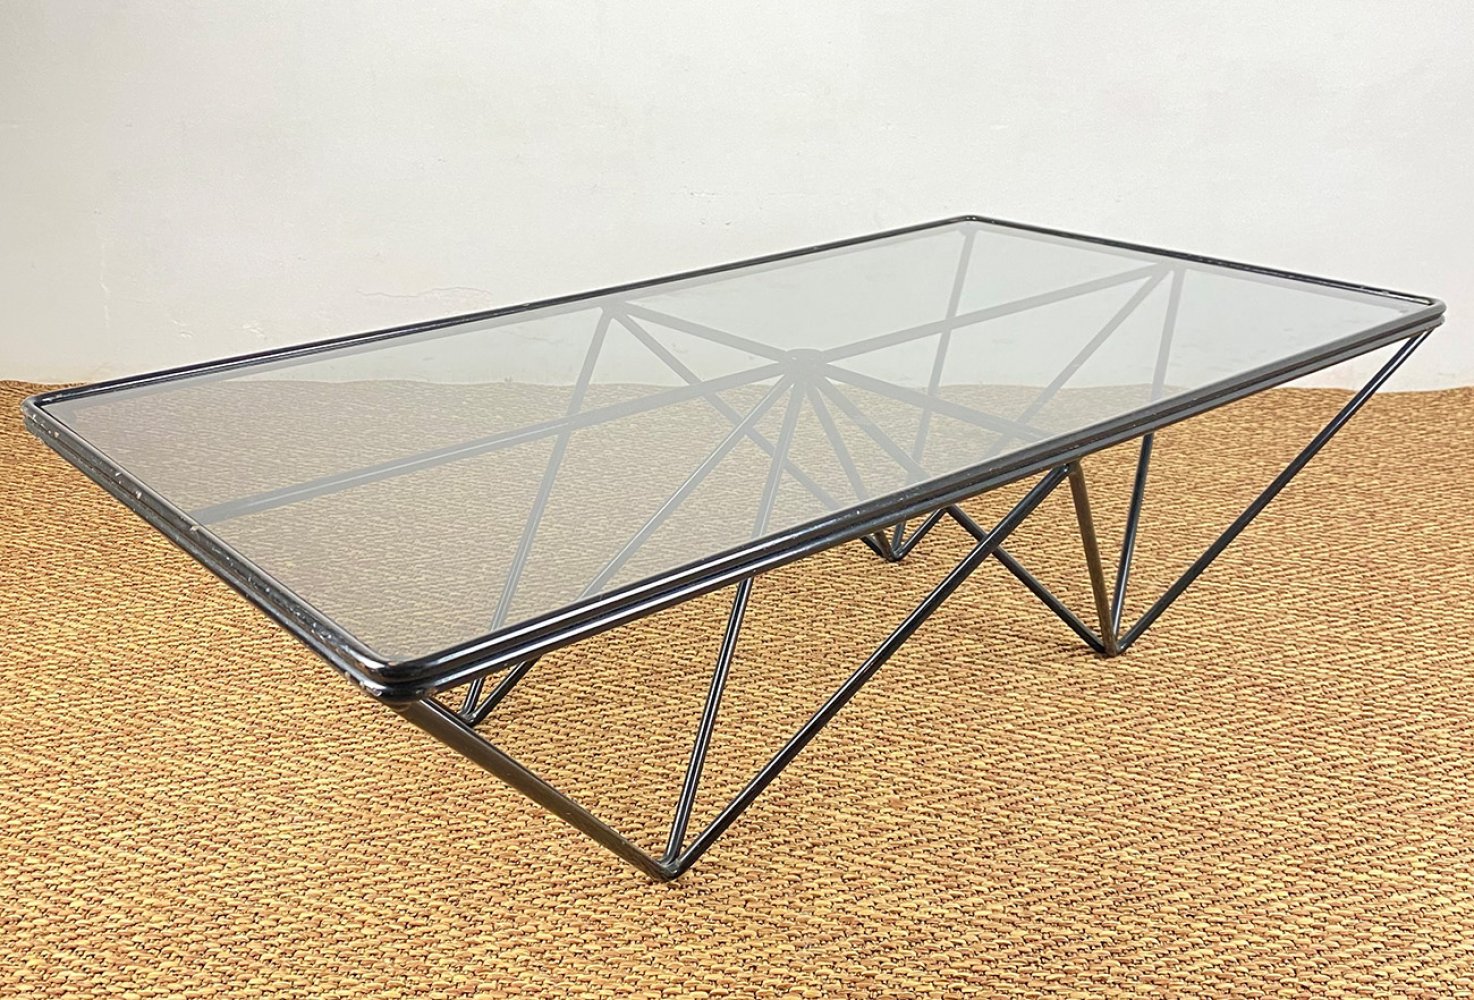 Contributed to PAOLO PIVA, (Adria, Italy, 1950 - Vienna, 2017).Coffee table "Alanda", 1970s.Producer